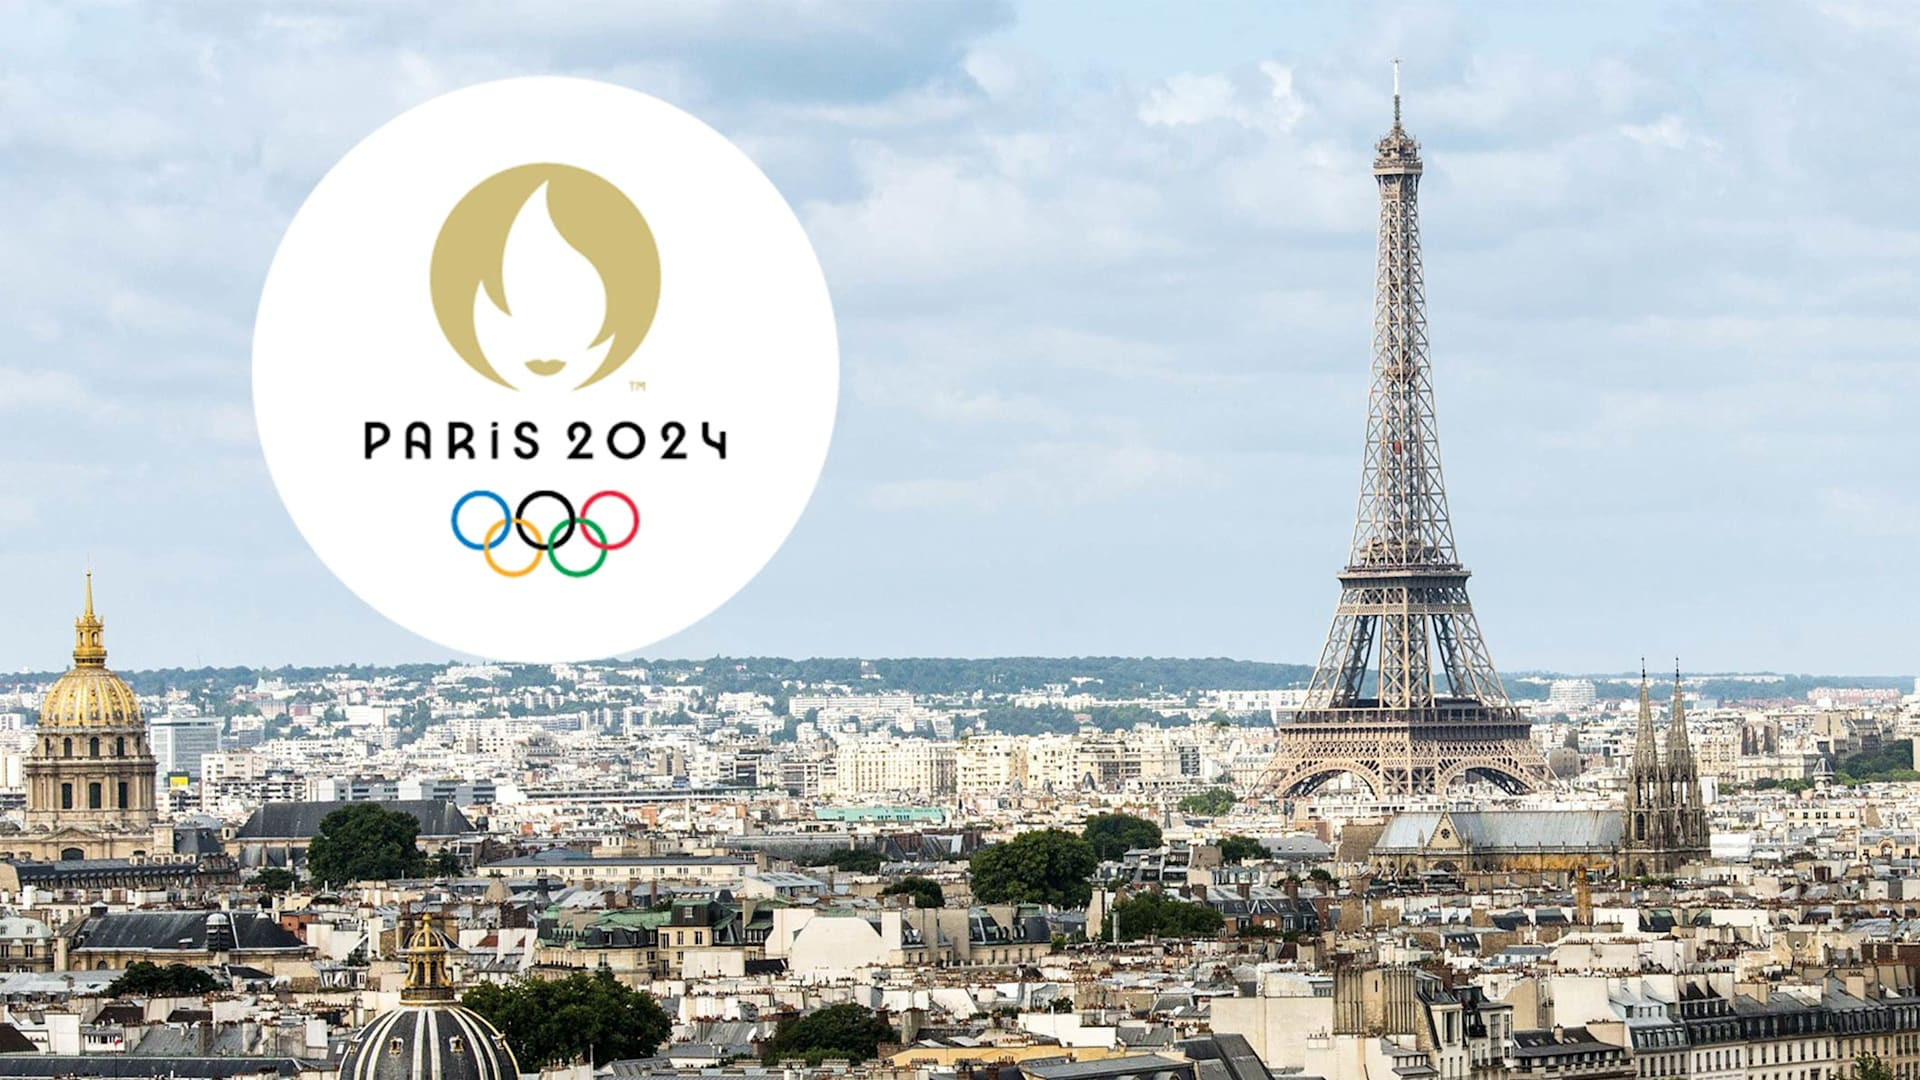 Paris 2024 organisers have announced that 13.4 million tickets will be available via a new centralised platform ©Paris 2024